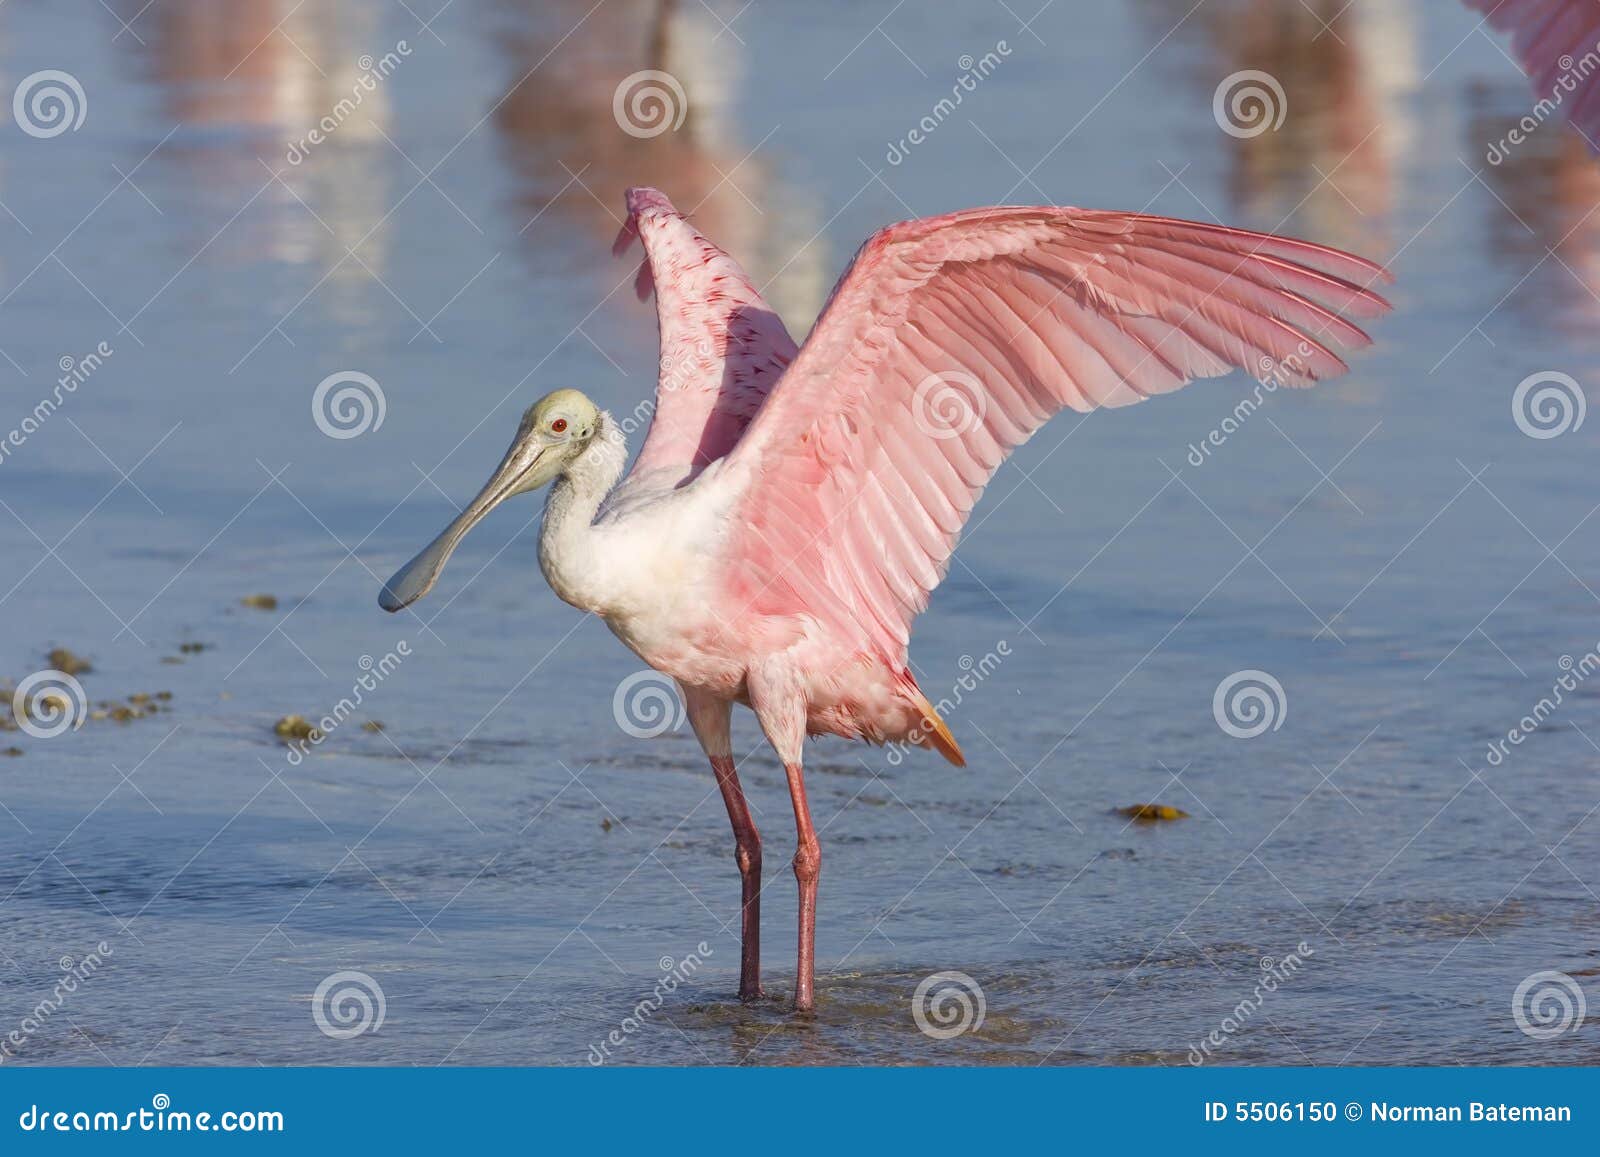 roseate spoonbill flapping his wings